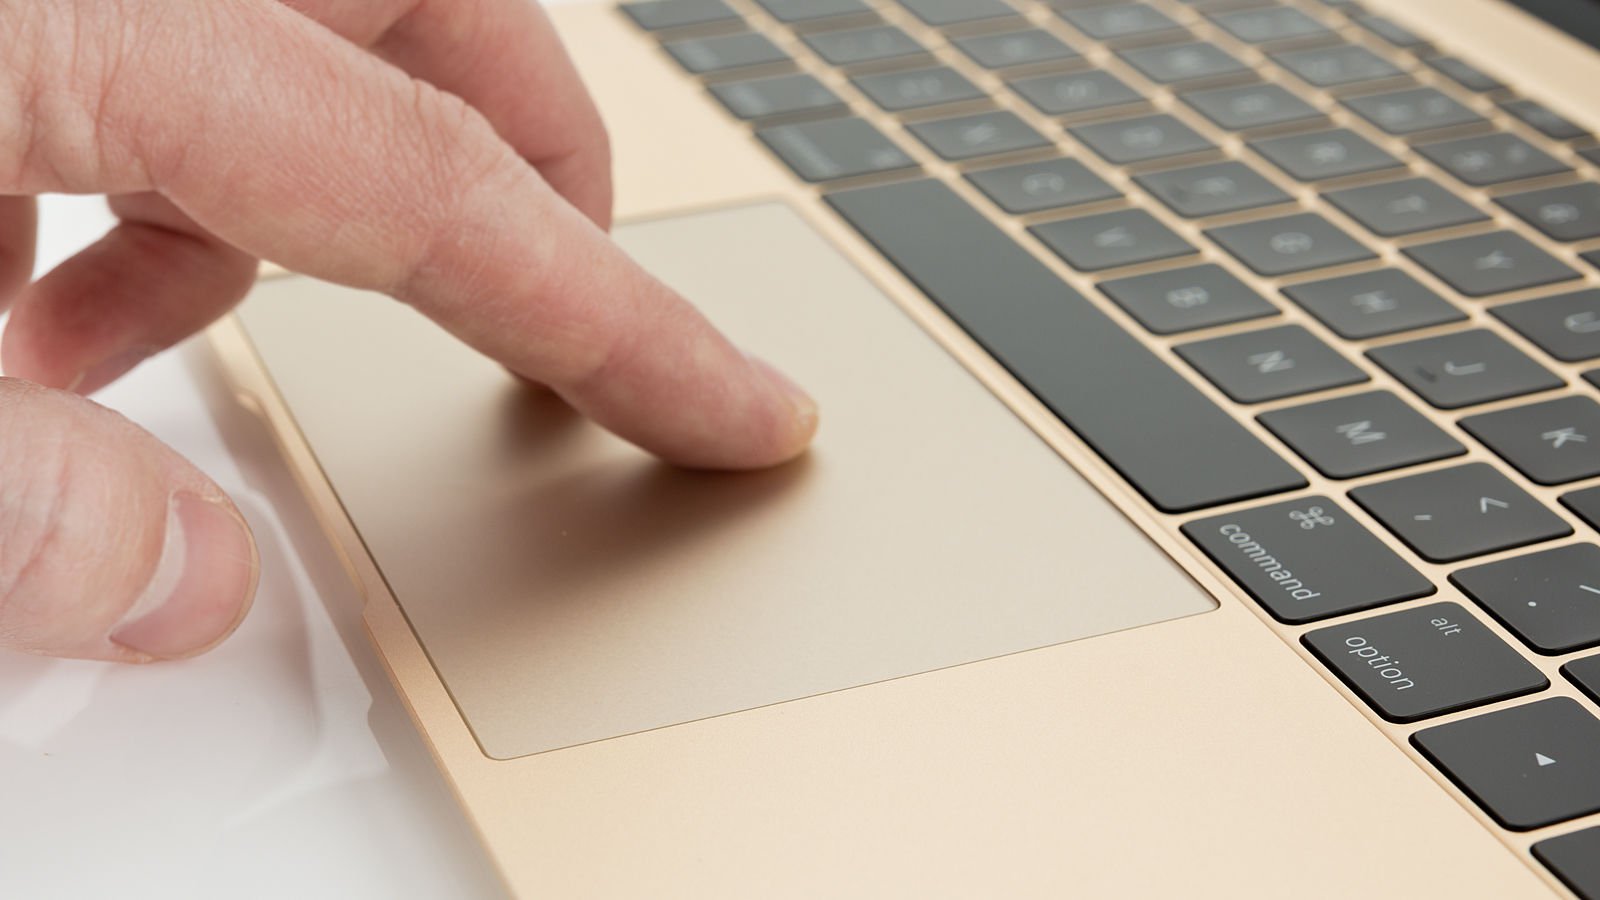 New MacBook Air 2017 rumours: Force Touch